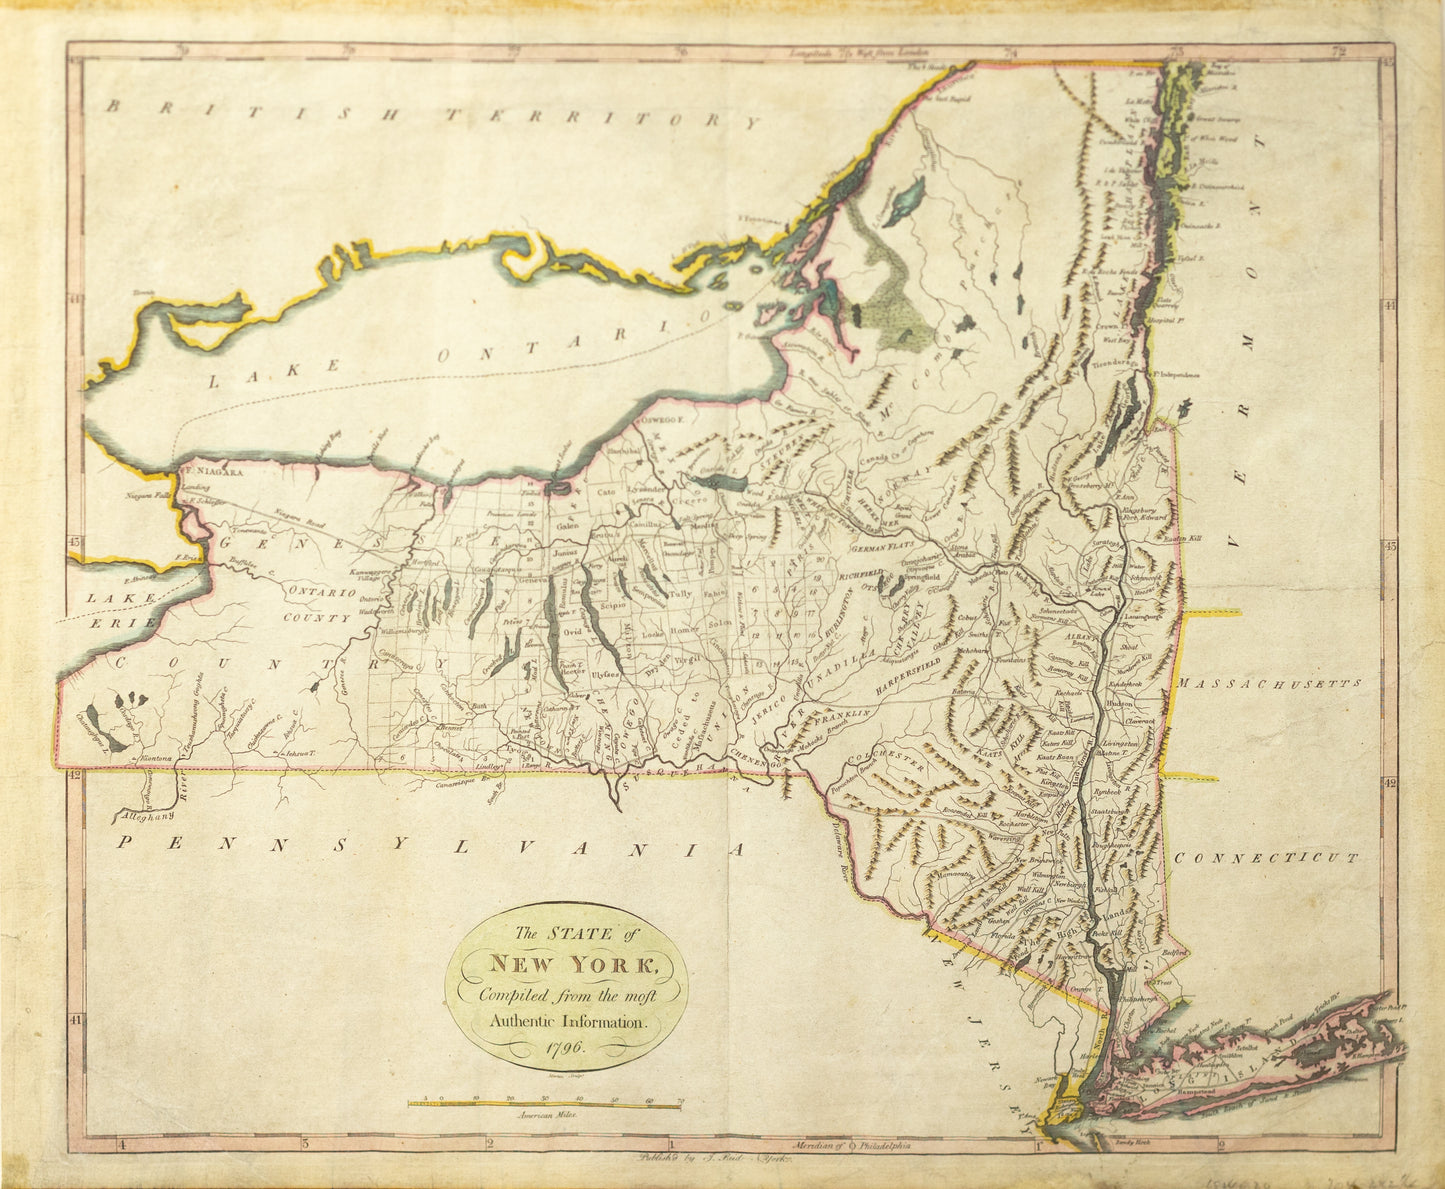 Reid, John. The State of New York Compiled from the most Authentic Information. New York, 1796.